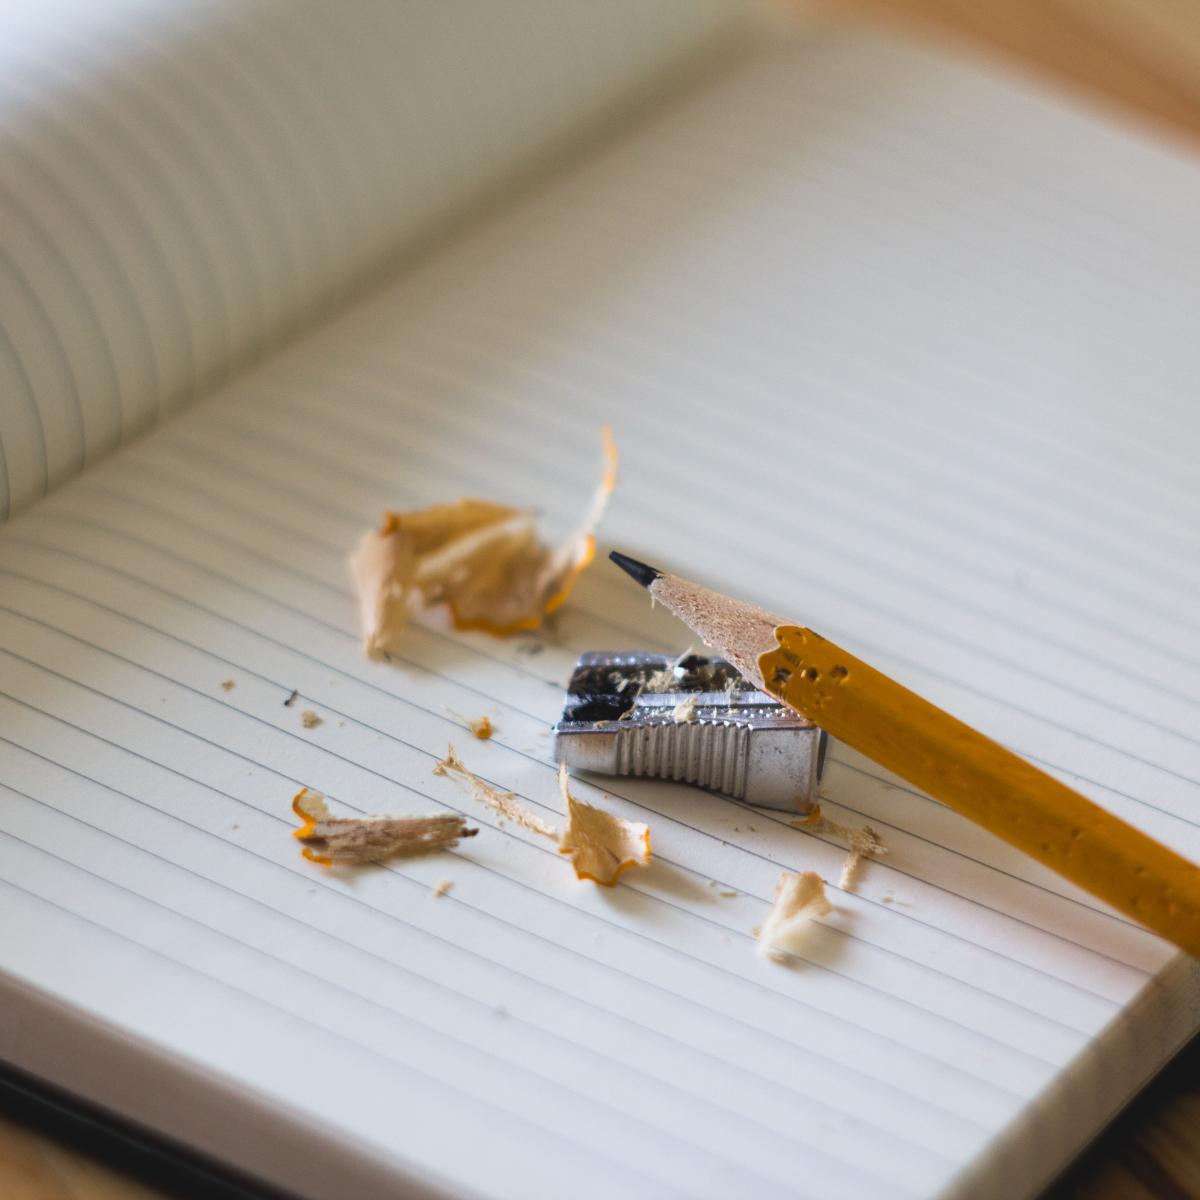 Photo of open notebook with blank lined pages sitting on a desk. On the page is a pencil and pencil shavings. Photo by Angelina Litvin from StockSnap.io